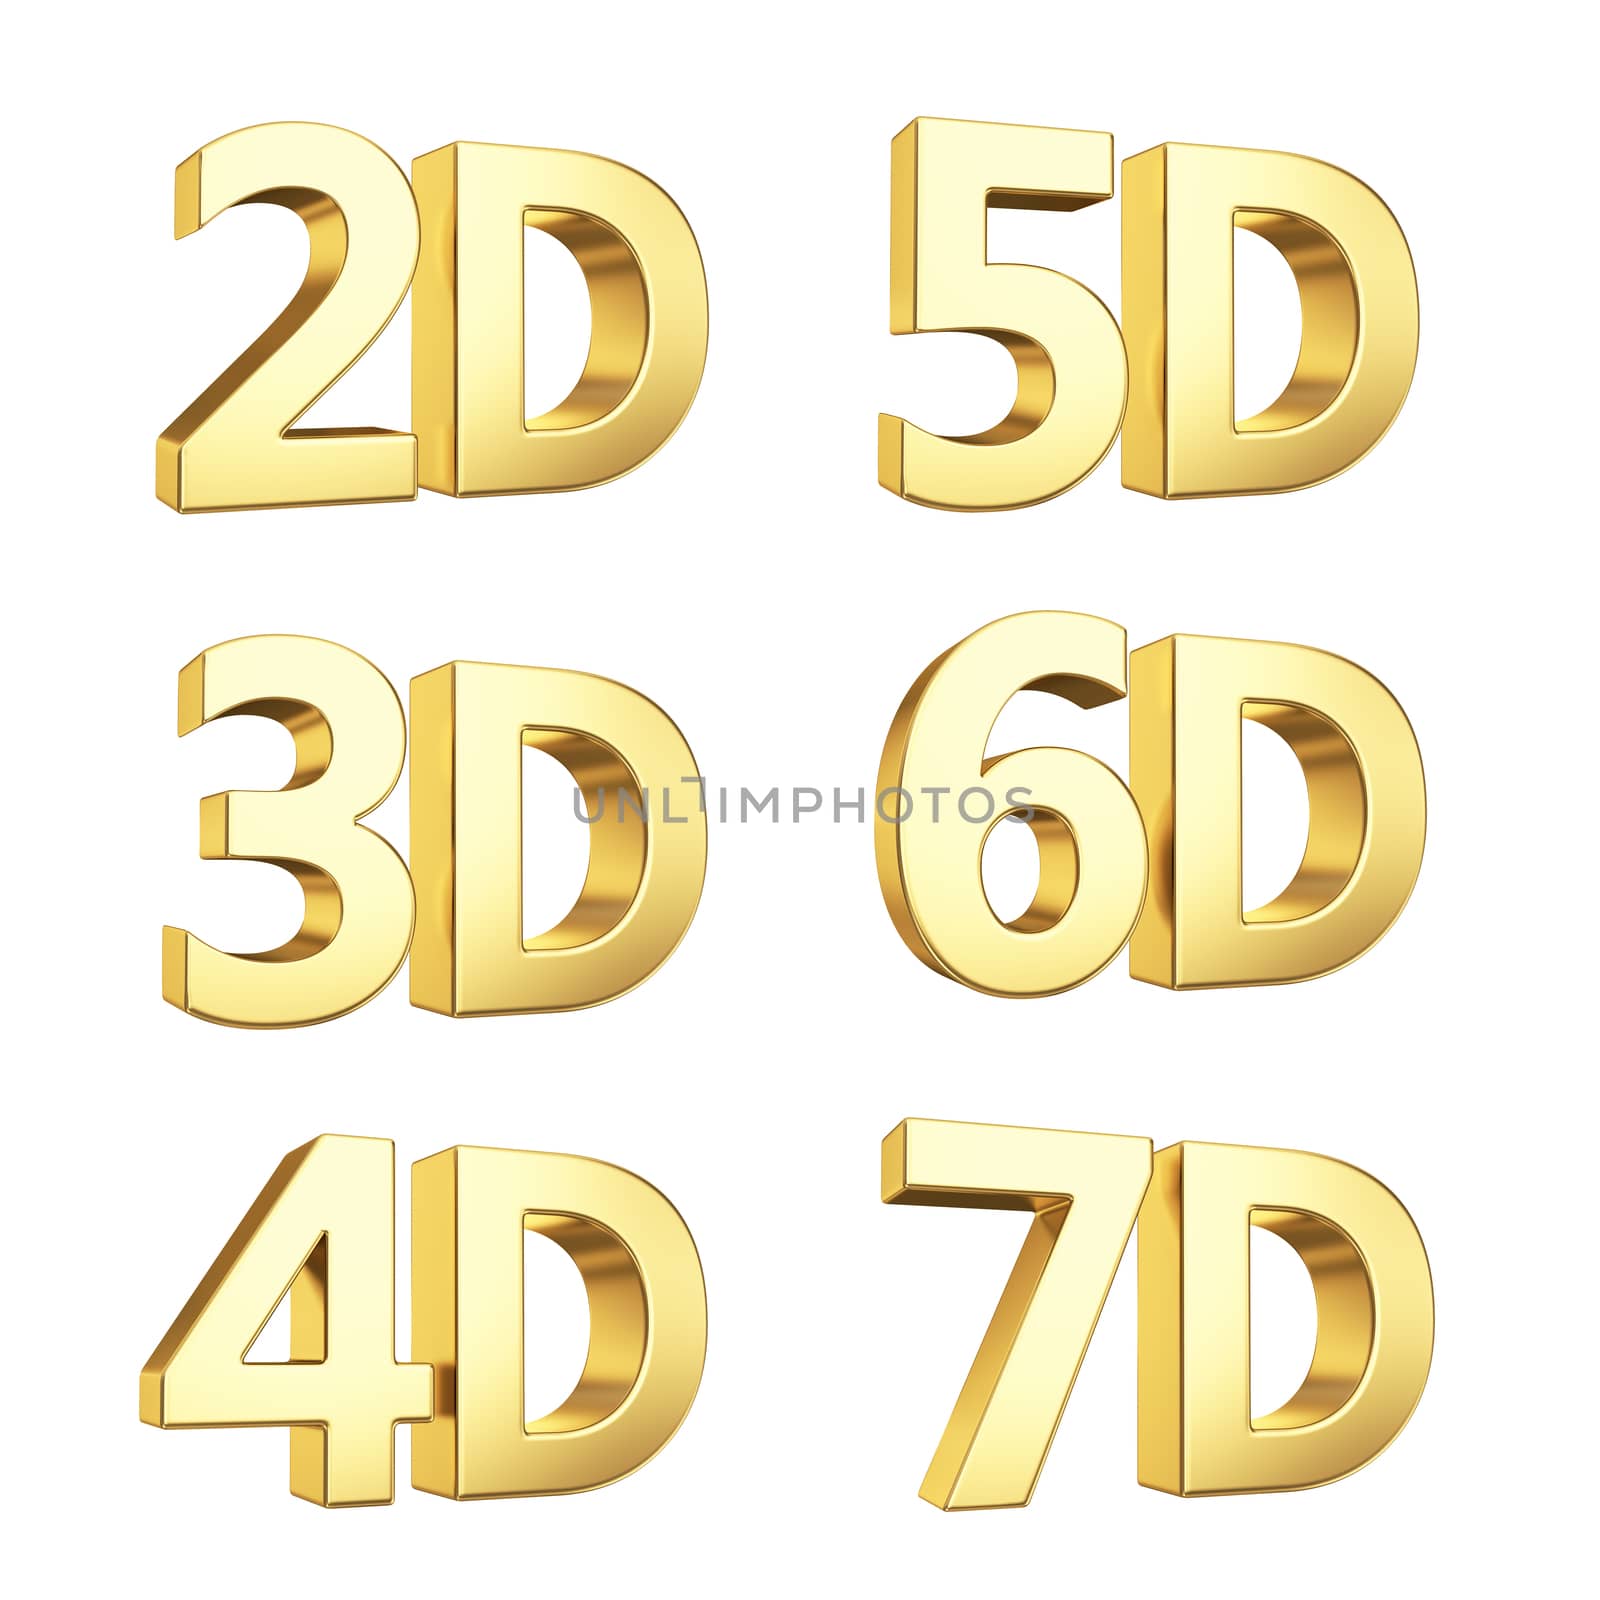 Golden dimension symbols isolated on white by 123dartist